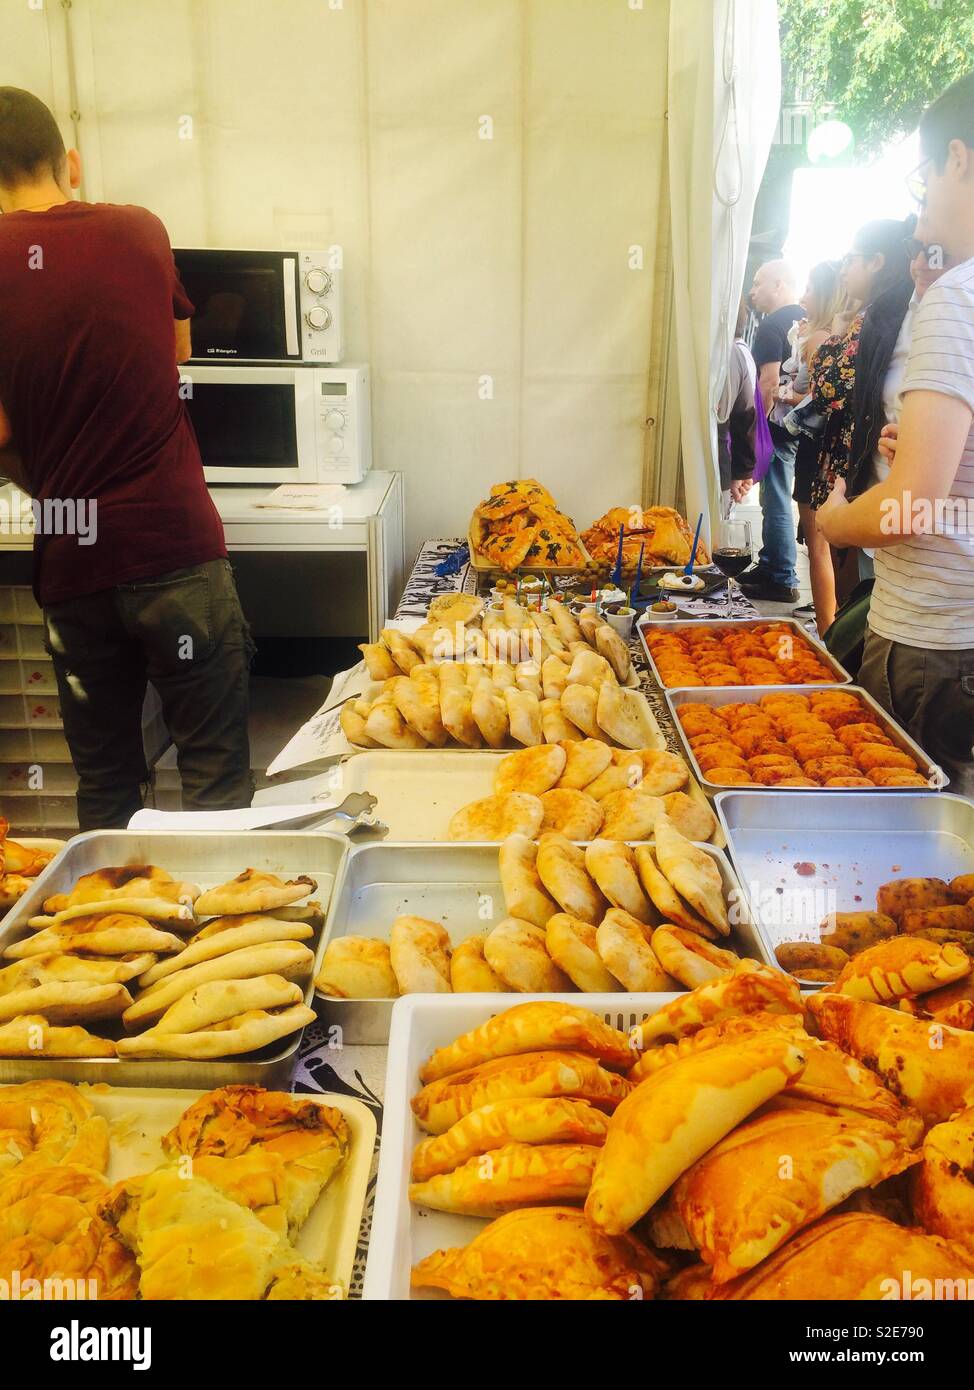 Warming up food in a microwave for a customer buying empanadas and other baked items at a market bakery in Barcelona Spain Stock Photo